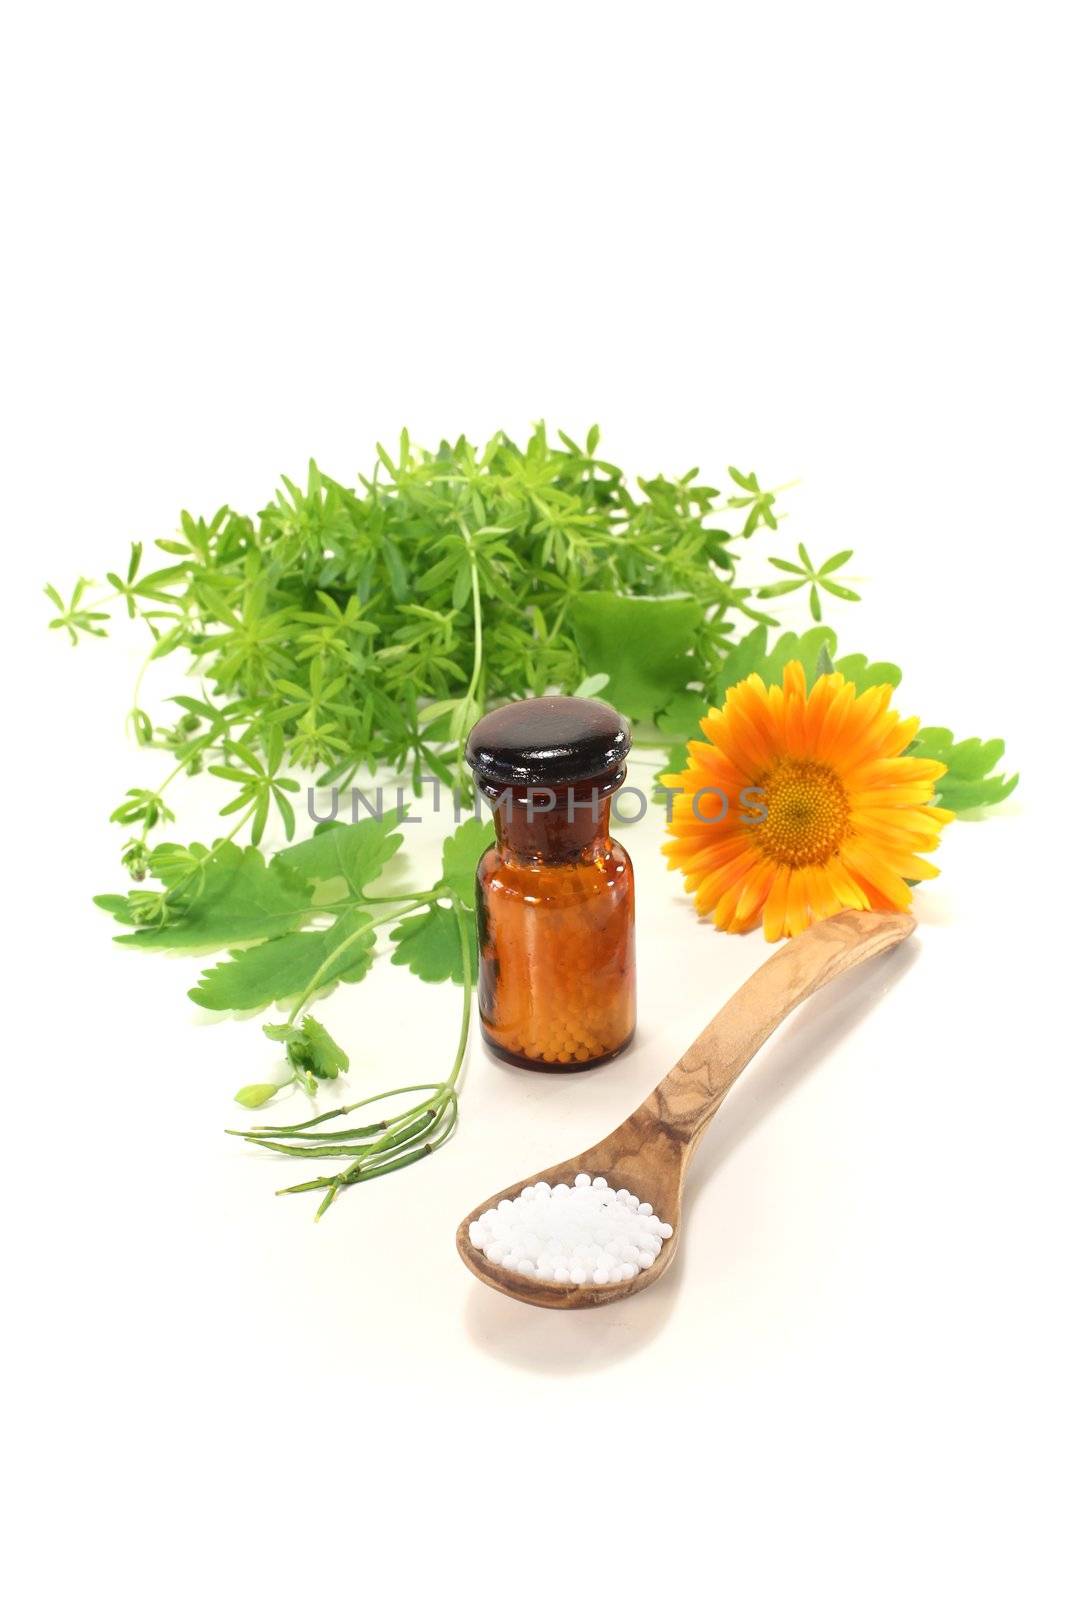 Homeopathy with globules, an apothecary jar and natural herbs